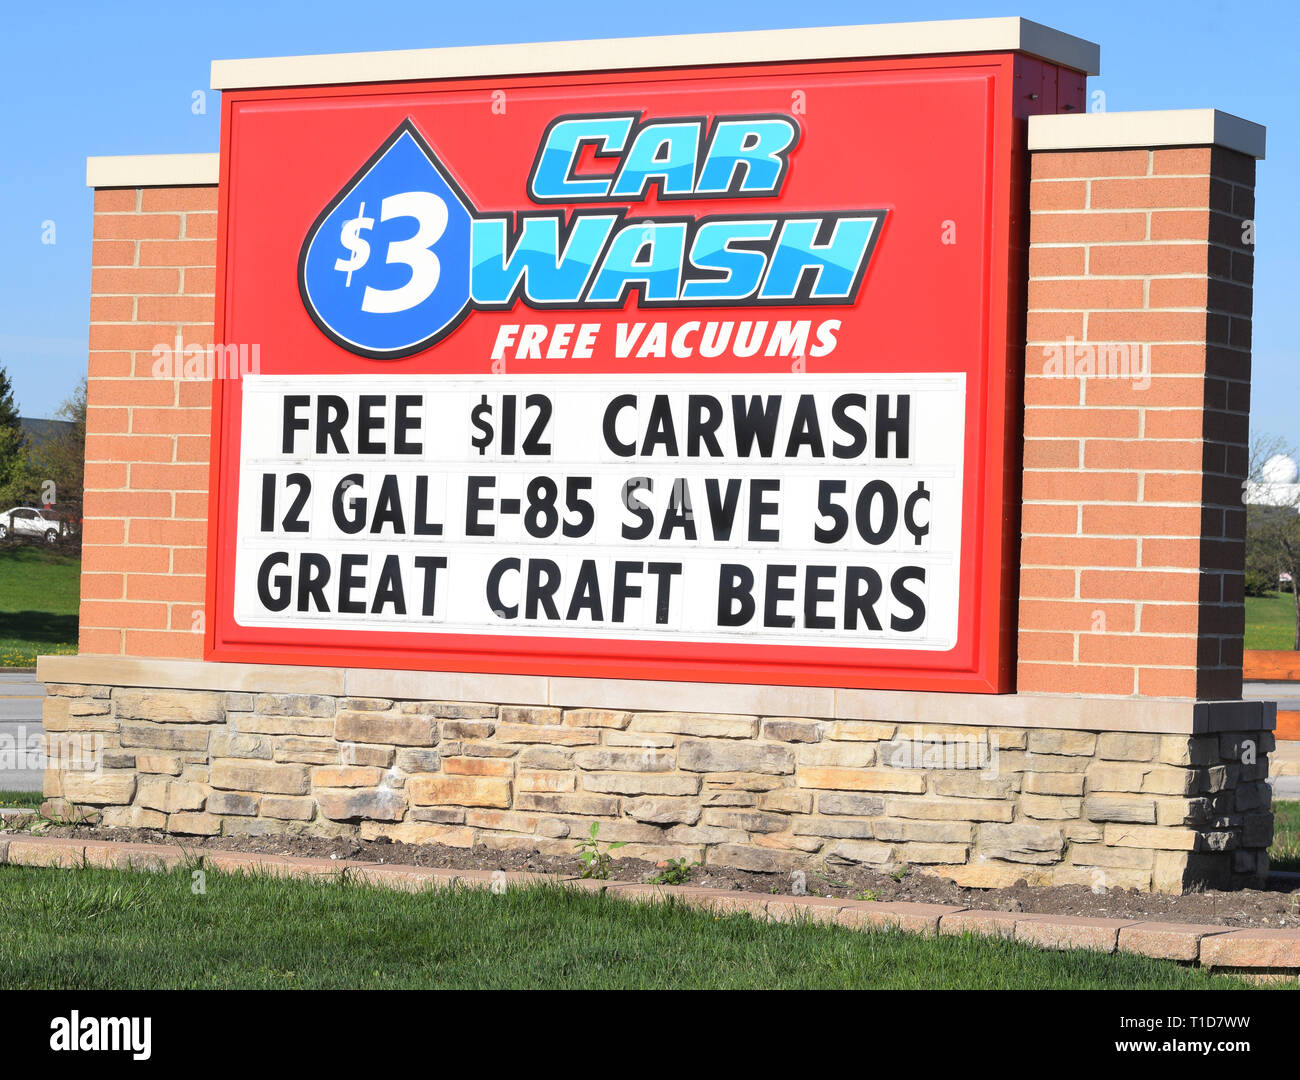 Car wash sign outside car wash advertising craft beers Stock Photo